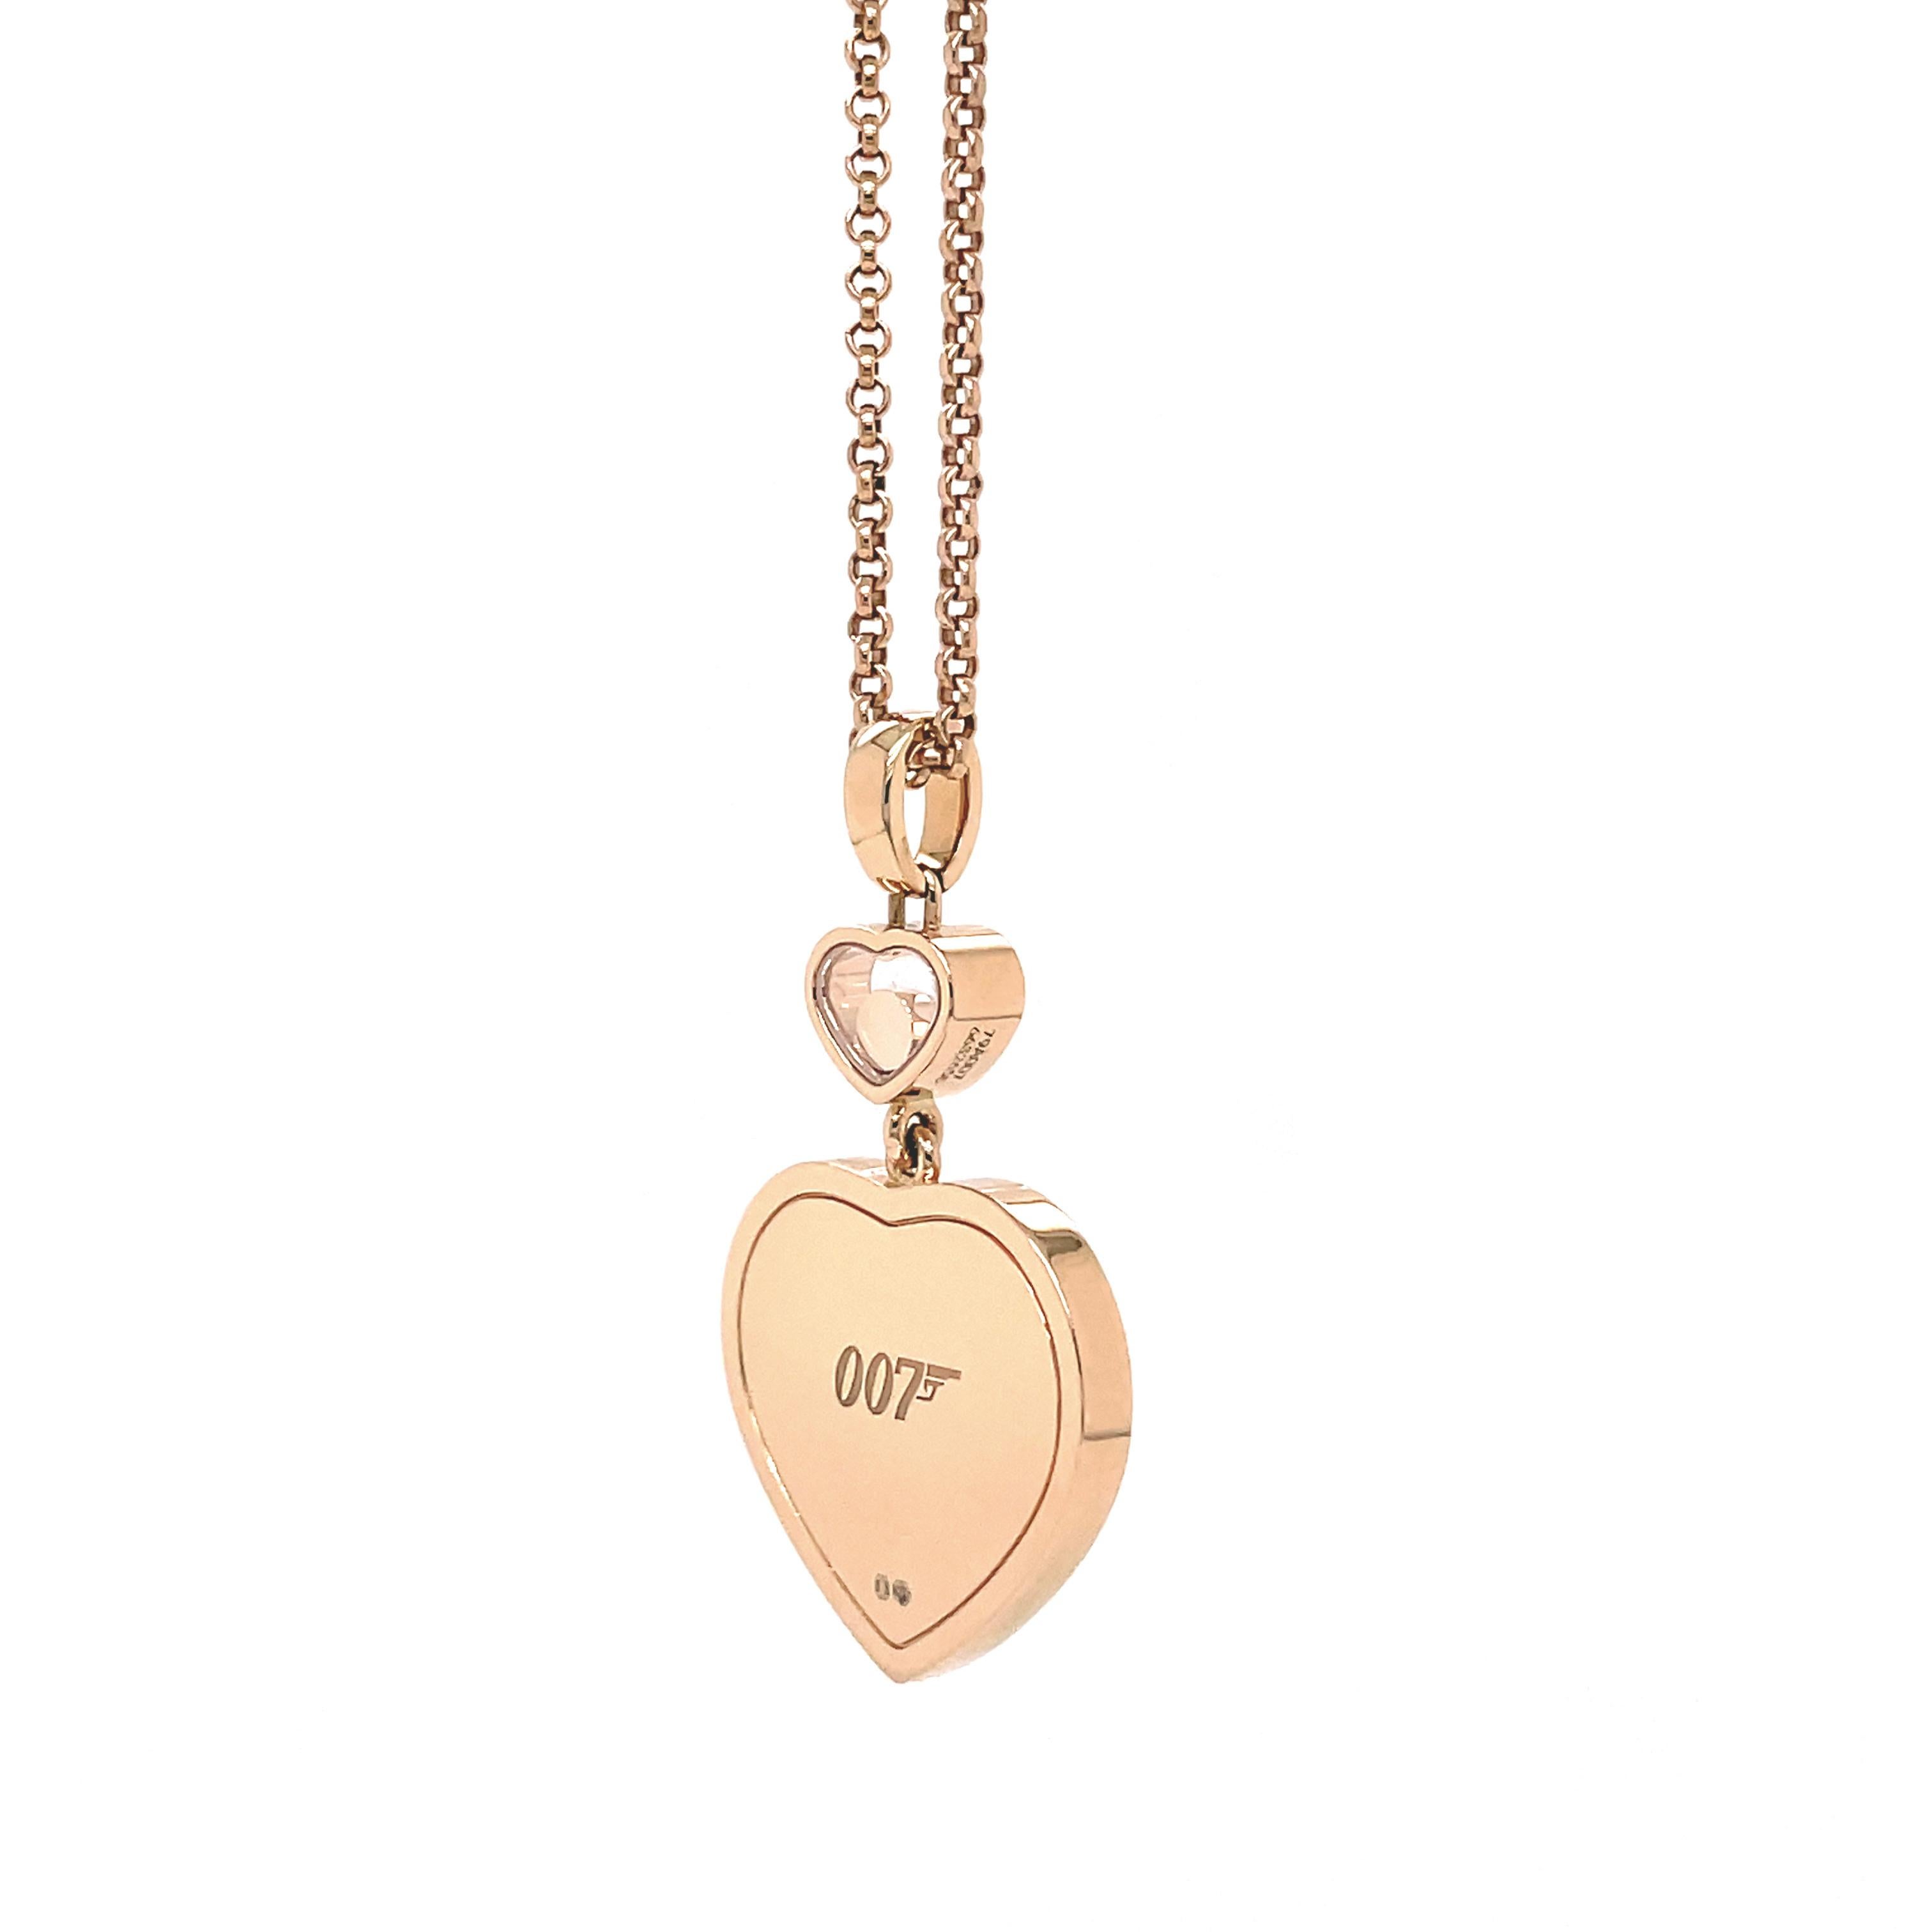 This gorgeous necklace is from Chopard's 'Happy Hearts Golden Hearts' capsule collection inspired by the strength of character and courage of the 007 woman. The limited-edition necklace is handmade from the house's responsibly sourced, ethical 18